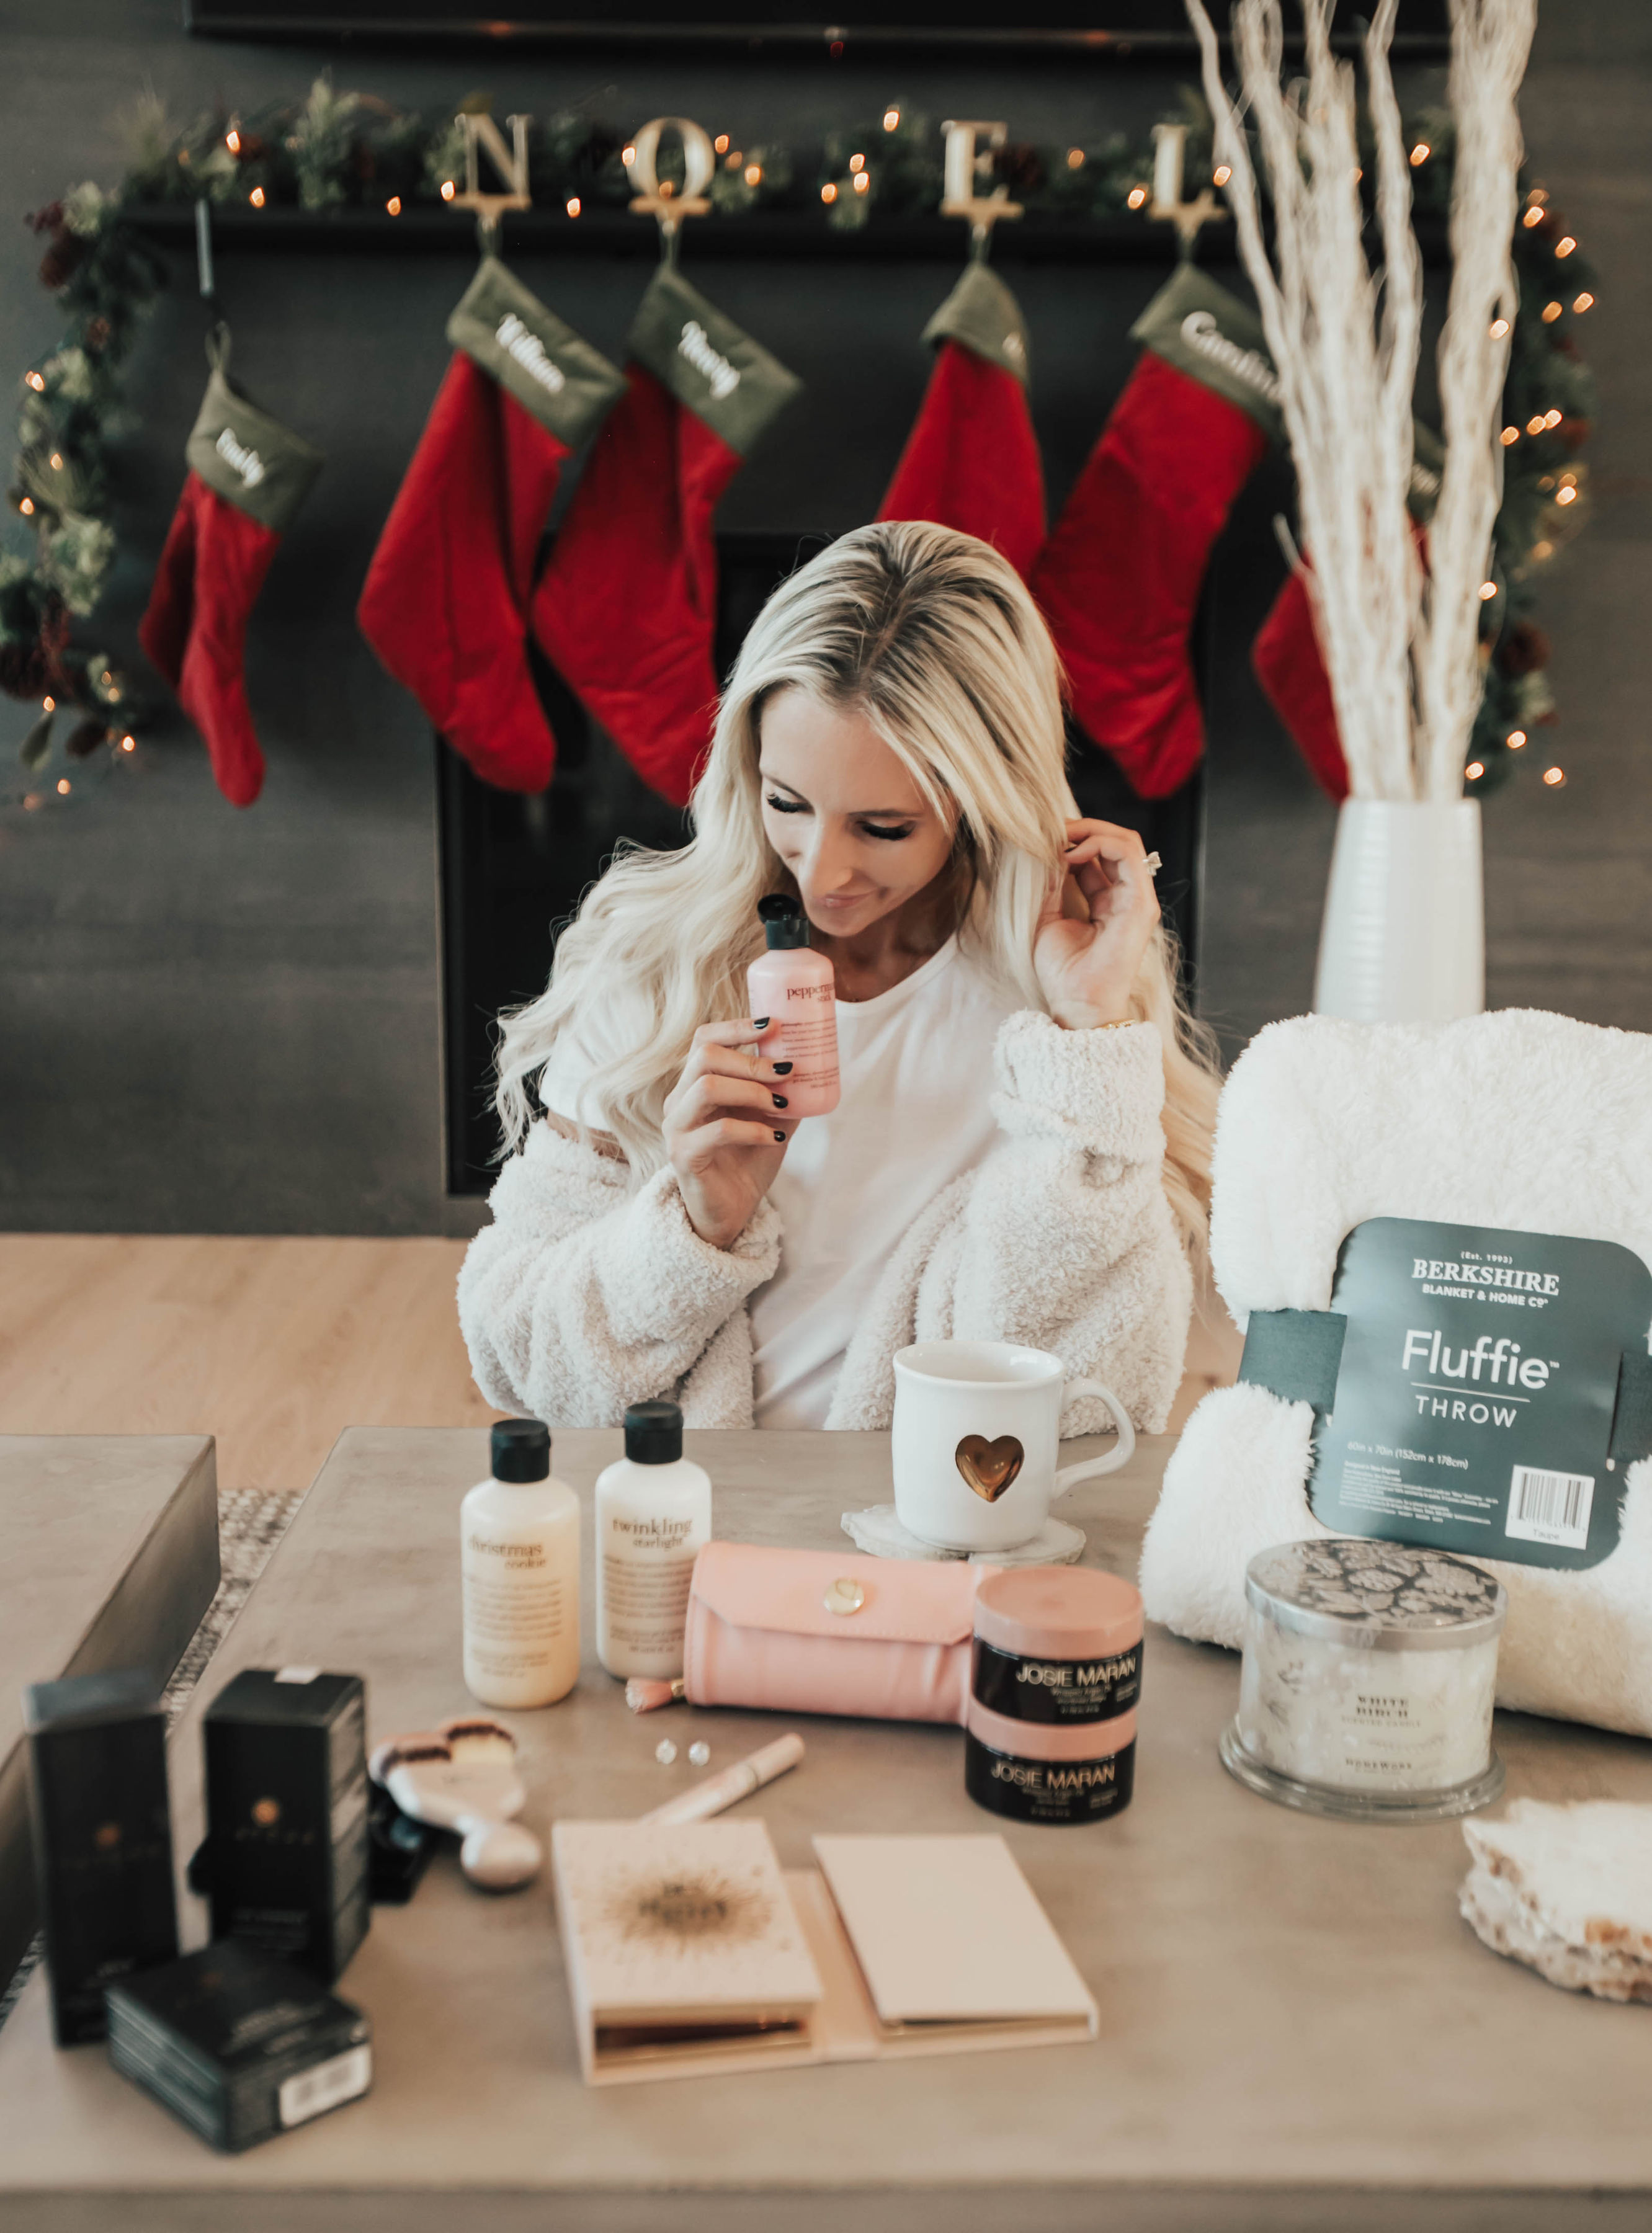 Emily Farren Wieczorek of Two Peas in a Prada shares all of her favorite gifts for the holidays from one of her favorite retailers in her QVC Gift Guide !!!